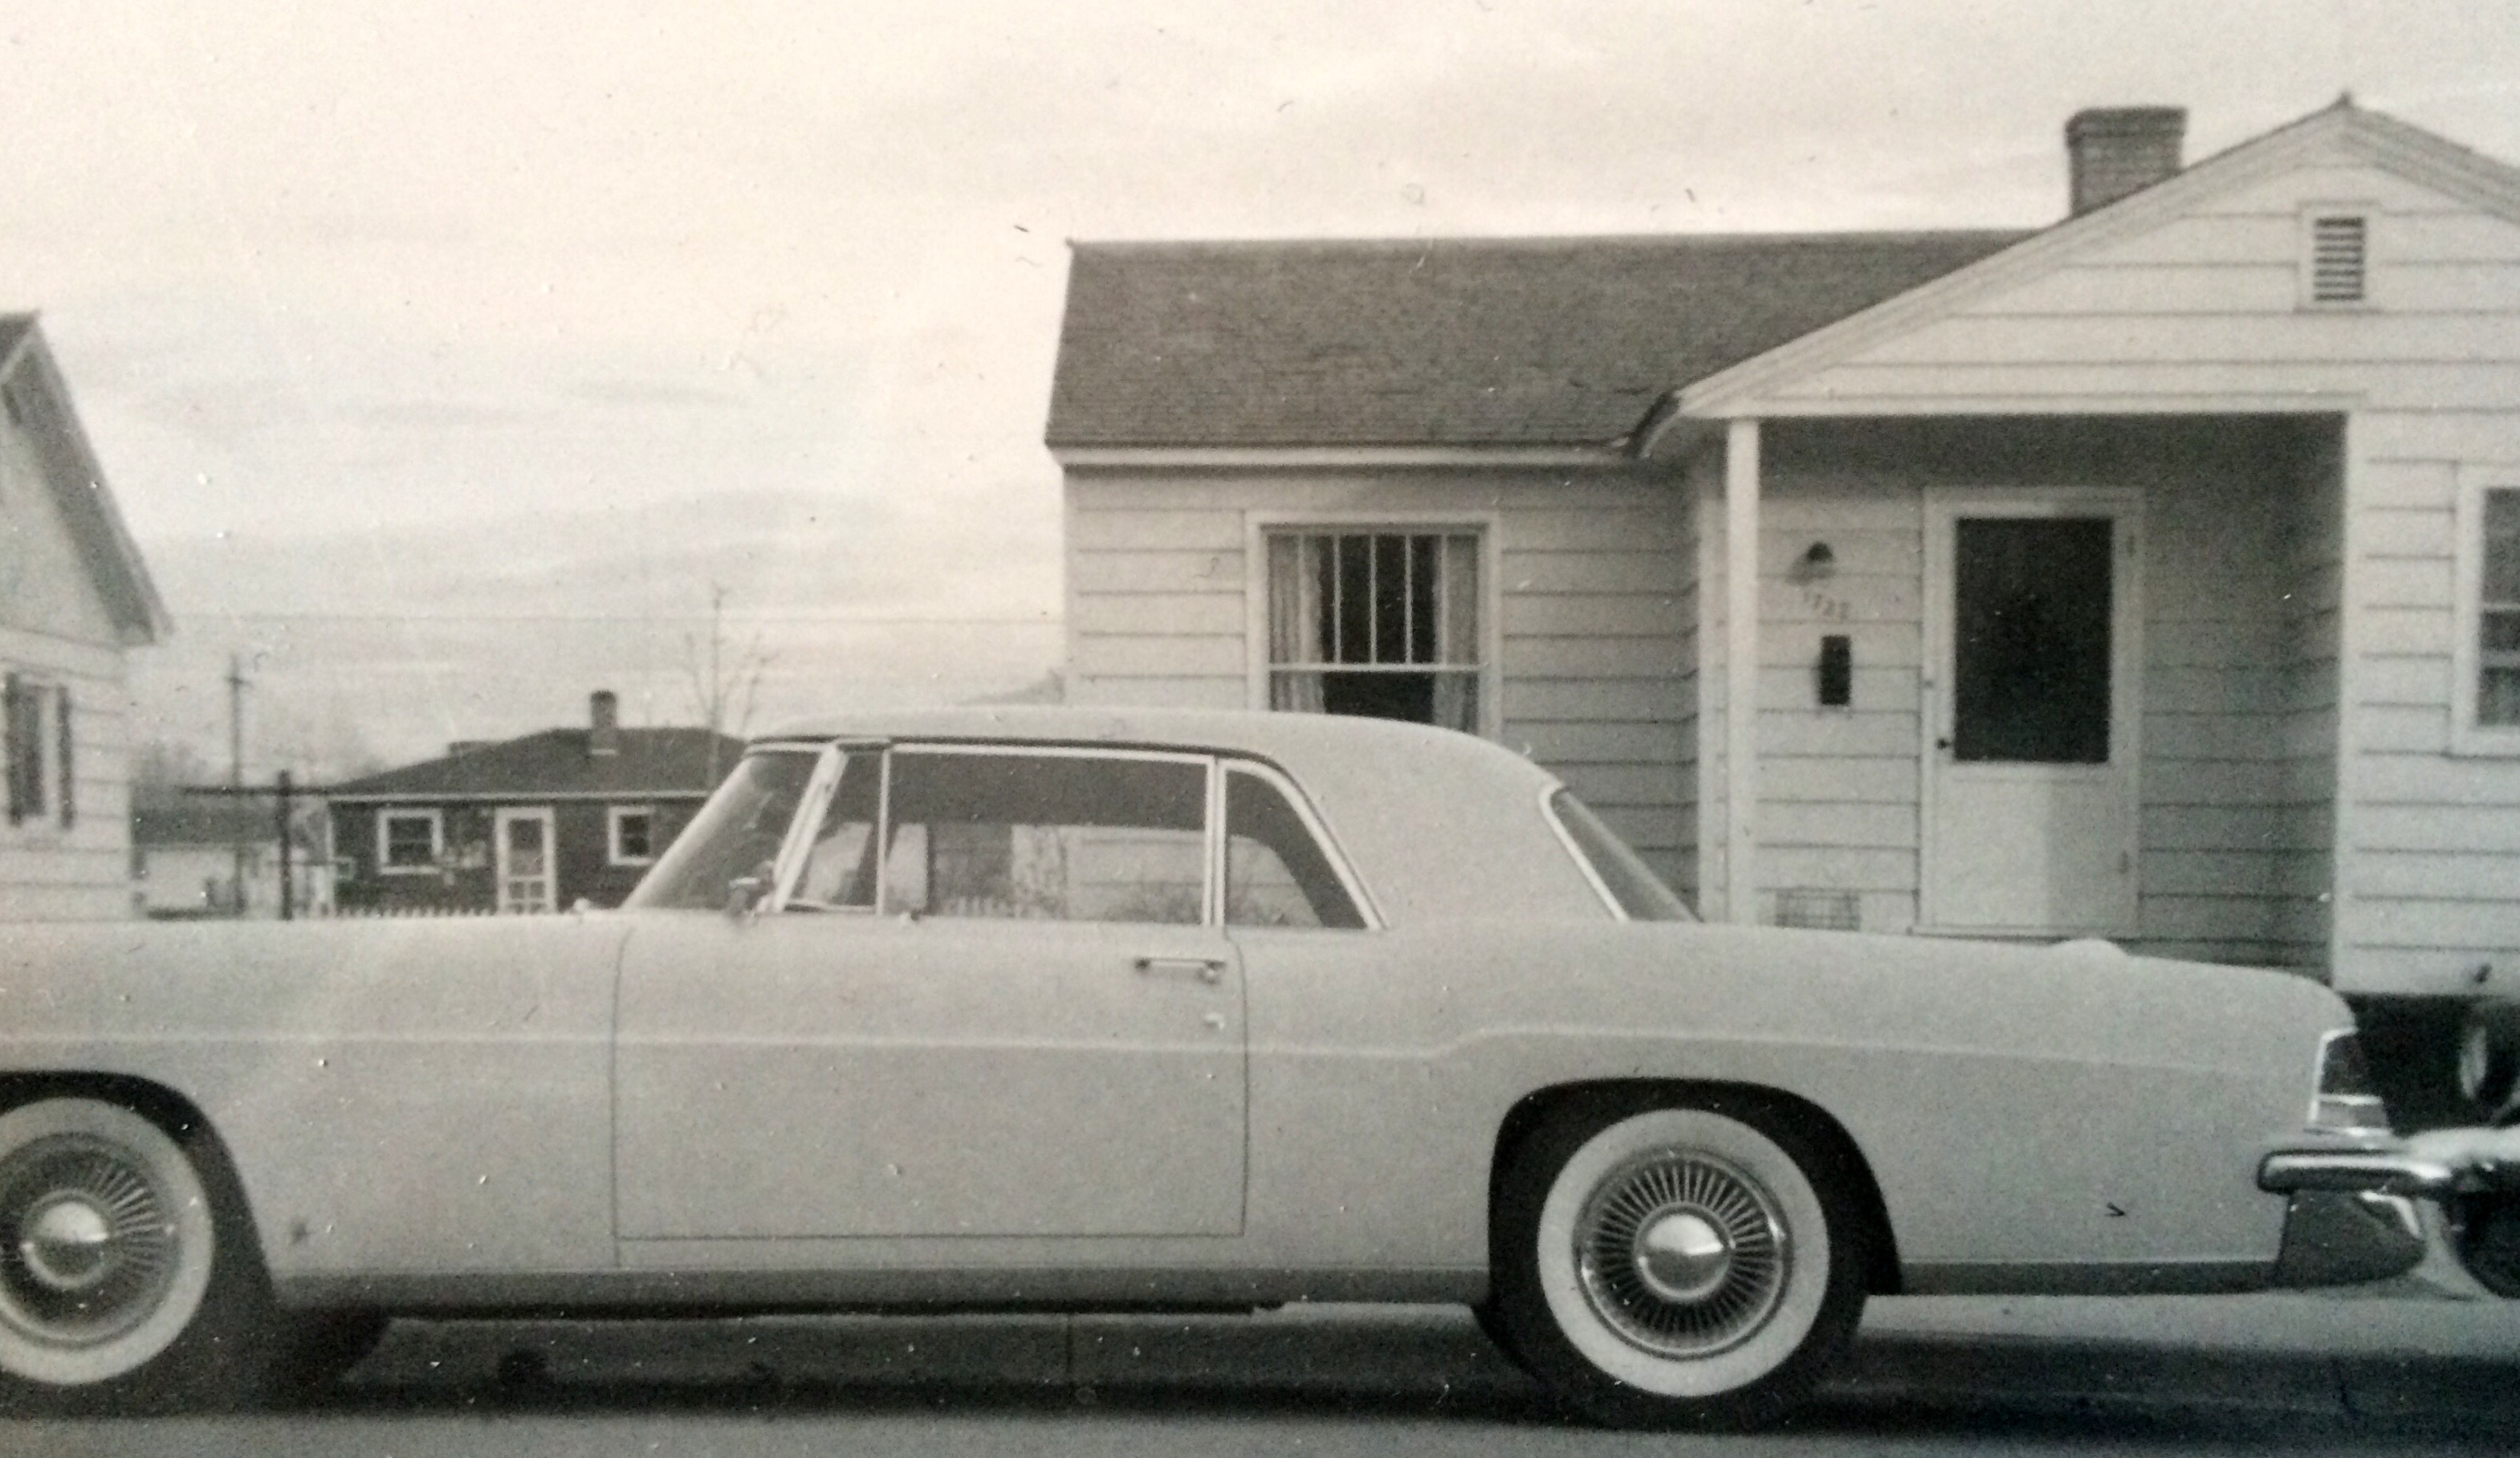 New Continental Mark II at
Murch family home, Grand Jct,Colo. 1955